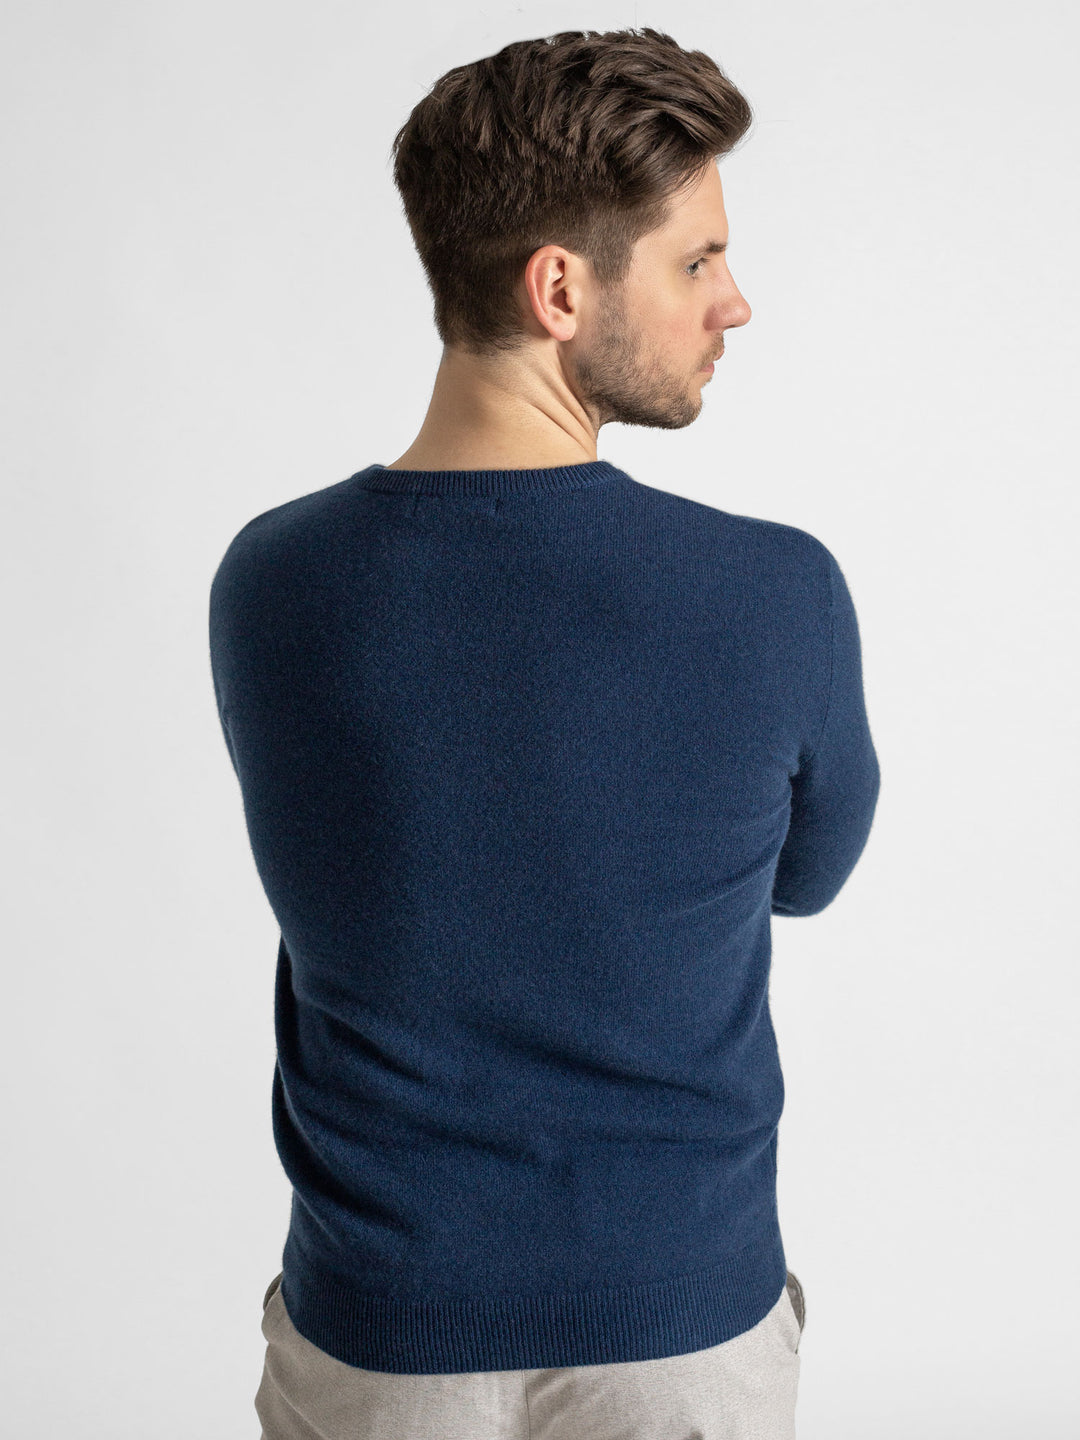 Men's cashmere sweater round neck from Kashmina, 100% cashmere Mountain blue color wool sweater